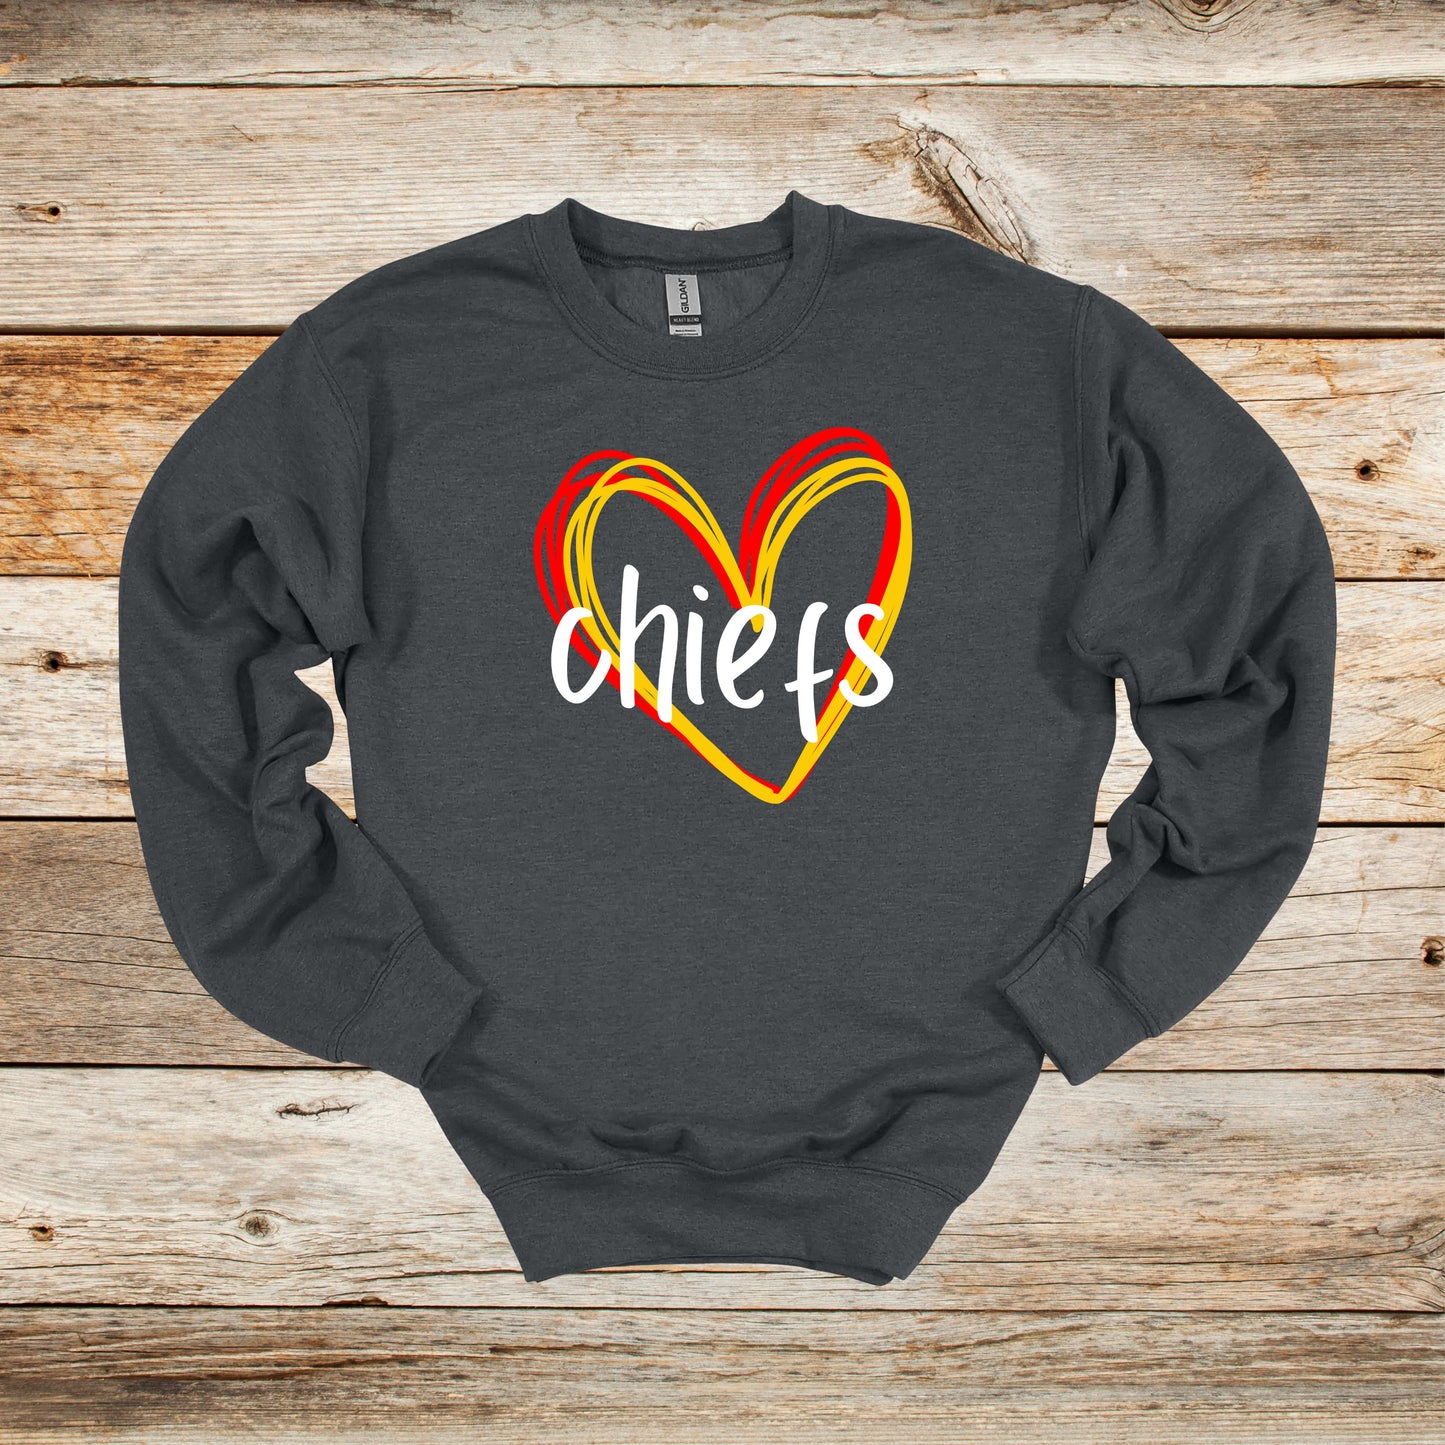 Football Crewneck and Hooded Sweatshirt - Chiefs Football - Adult and Children's Tee Shirts - Sports Hooded Sweatshirt Graphic Avenue Crewneck Sweatshirt Dark Heather Adult Small